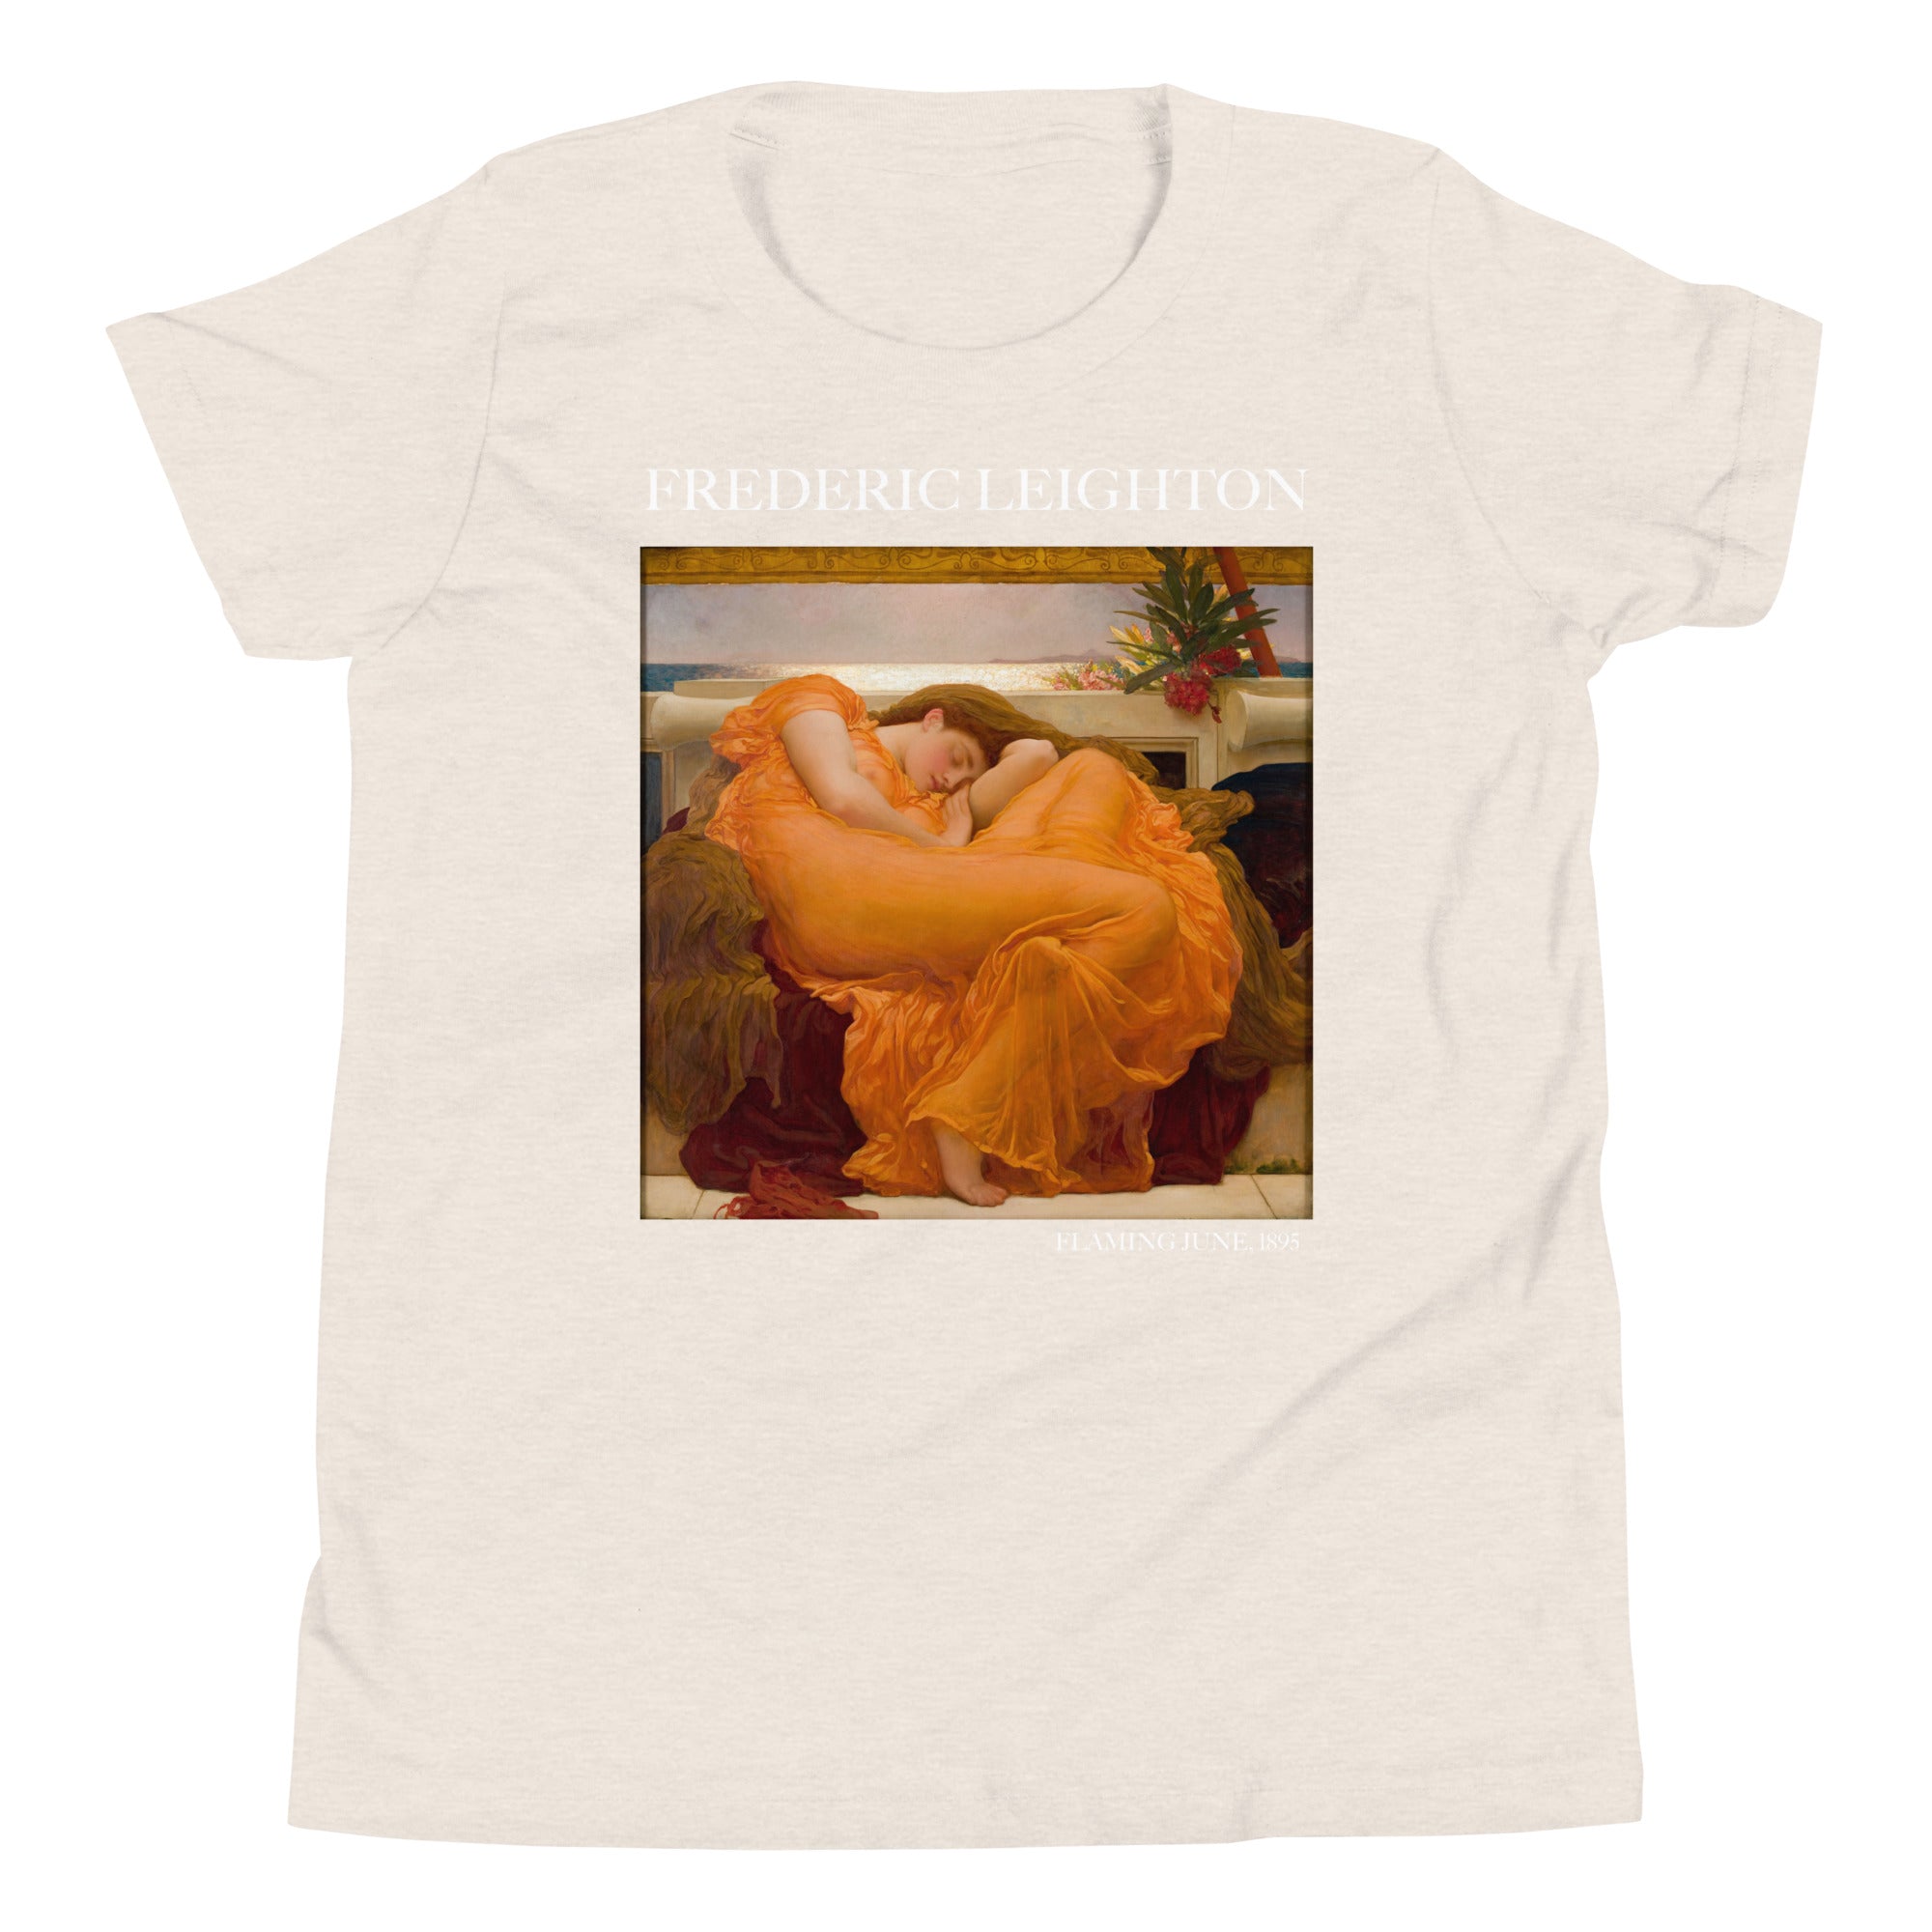 Frederic Leighton 'Flaming June' Famous Painting Short Sleeve T-Shirt | Premium Youth Art Tee